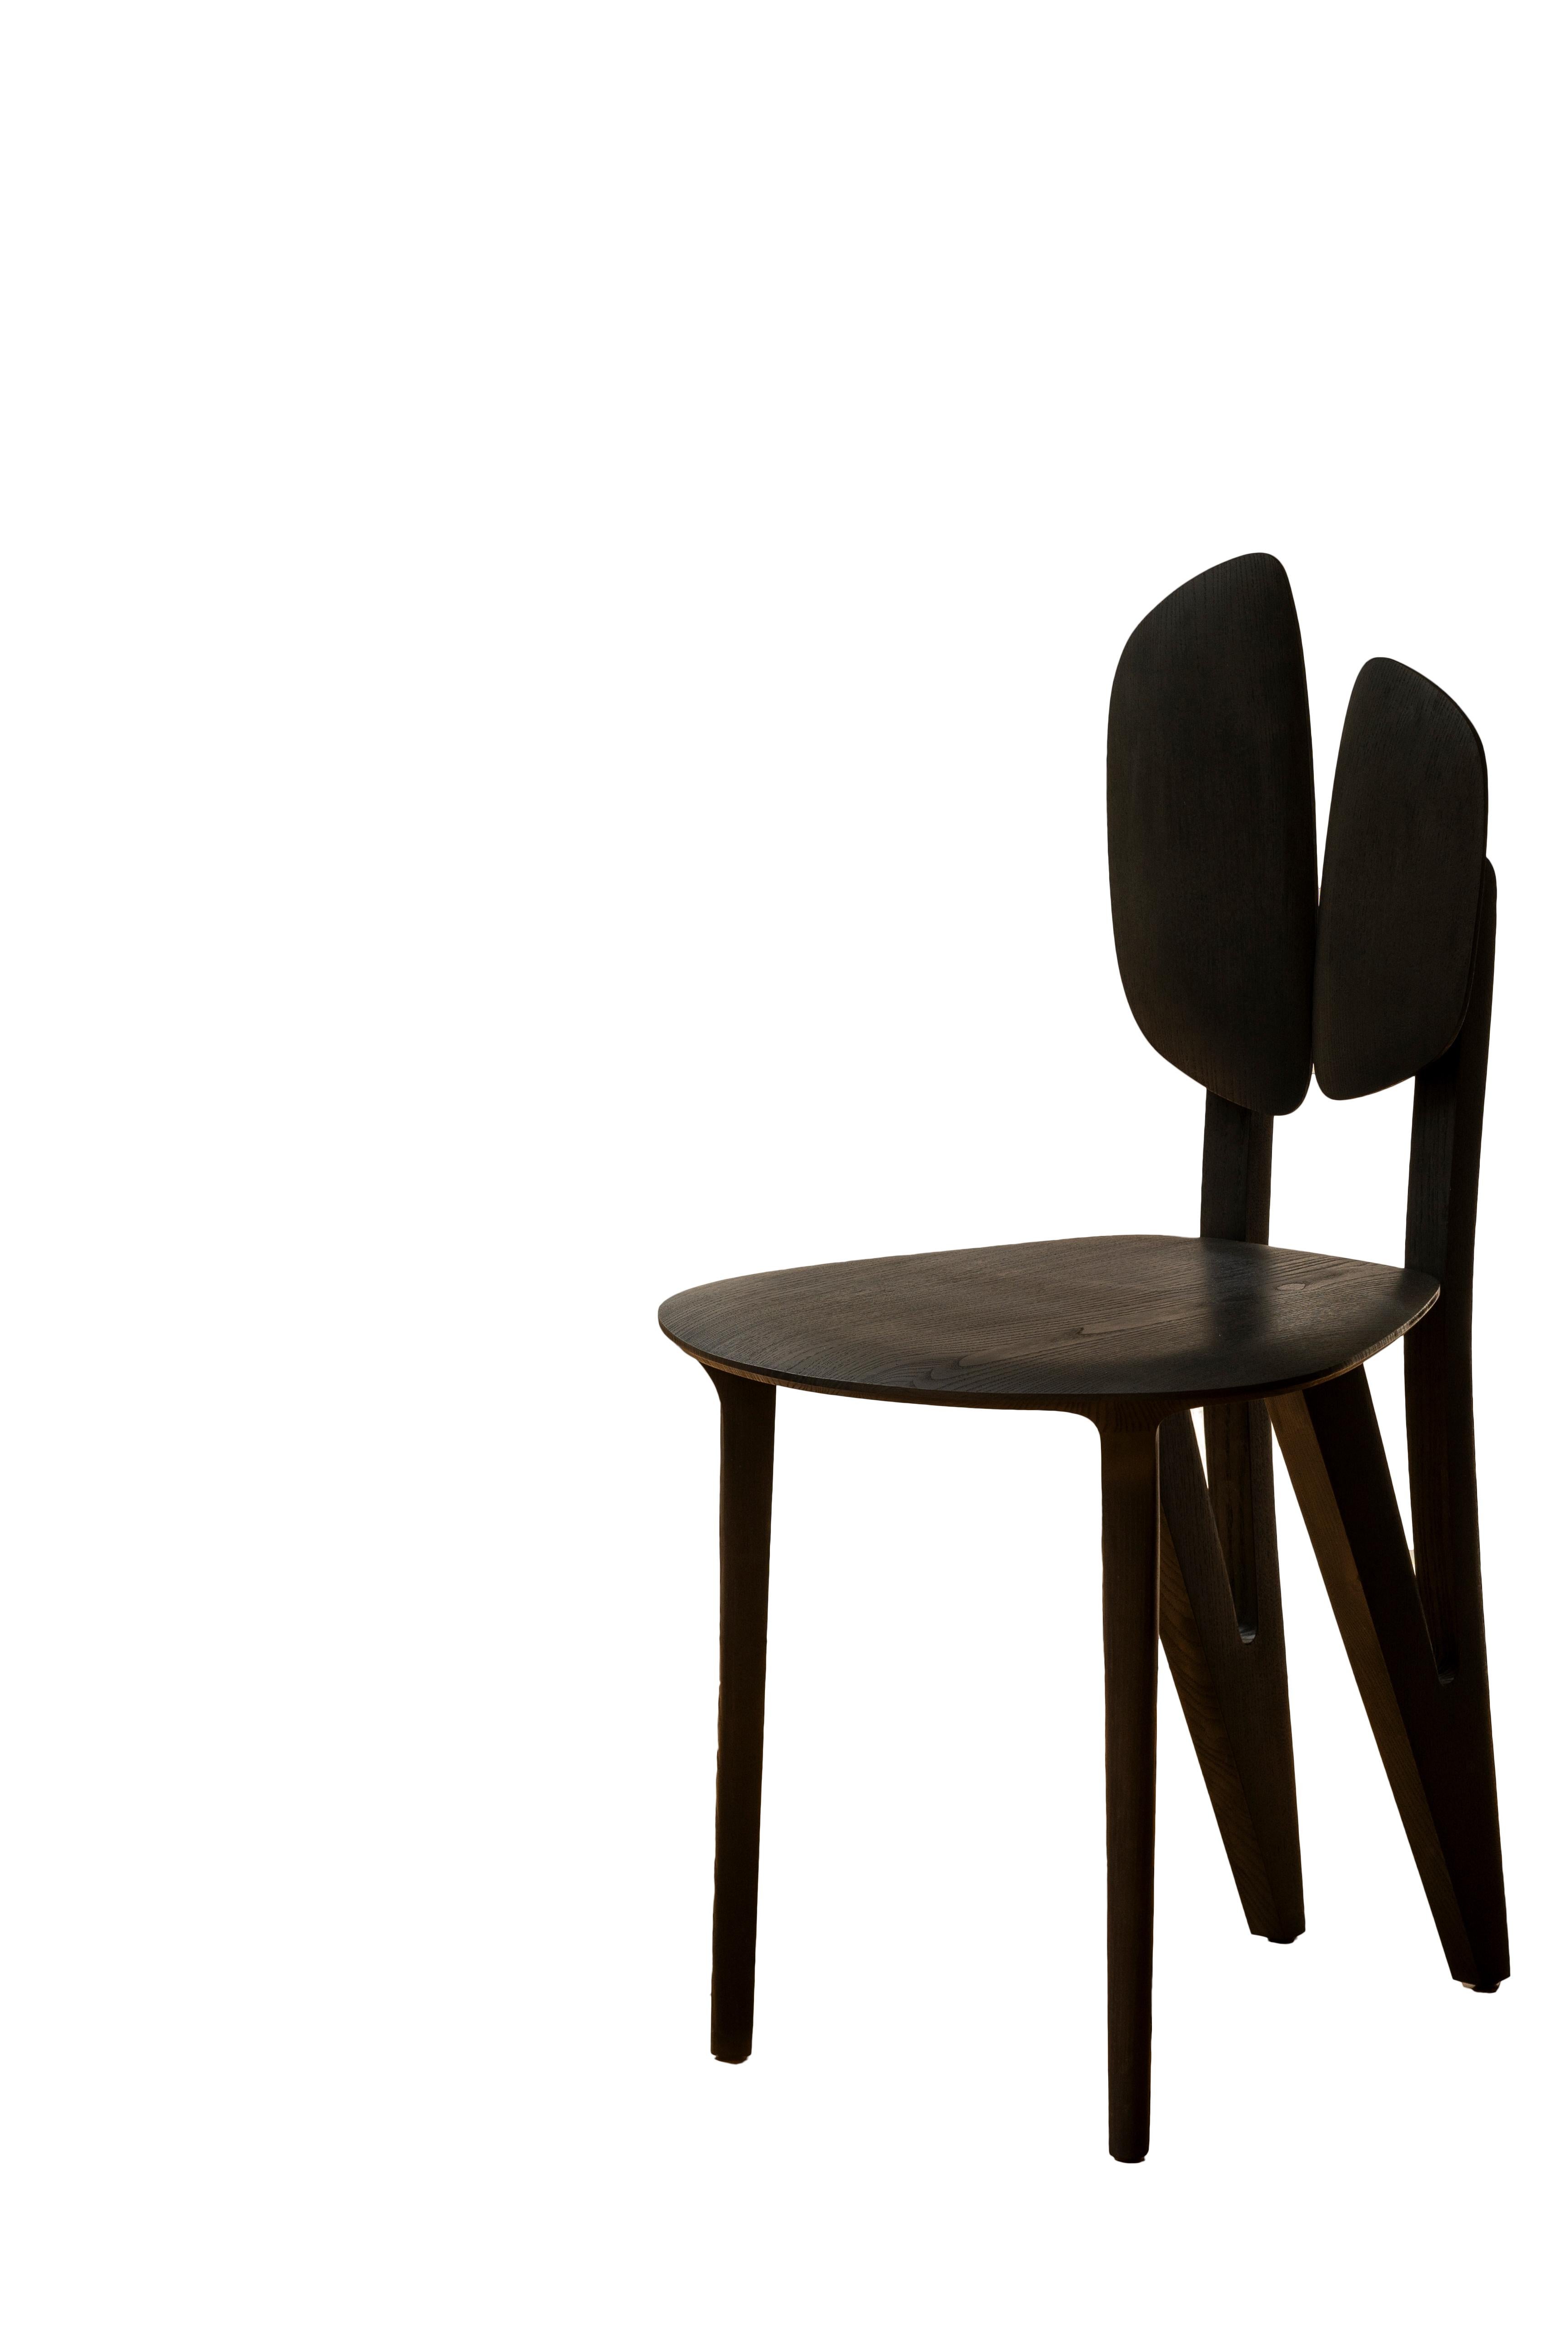 pétiole chair

Tinted ash chair made by the designer Alexandre Labruyère in 2023. The Petiole chair is part of the Petiole collection inspired by the natural principle of the petiole, the stem that attaches the leaf to the branch, and which are one.